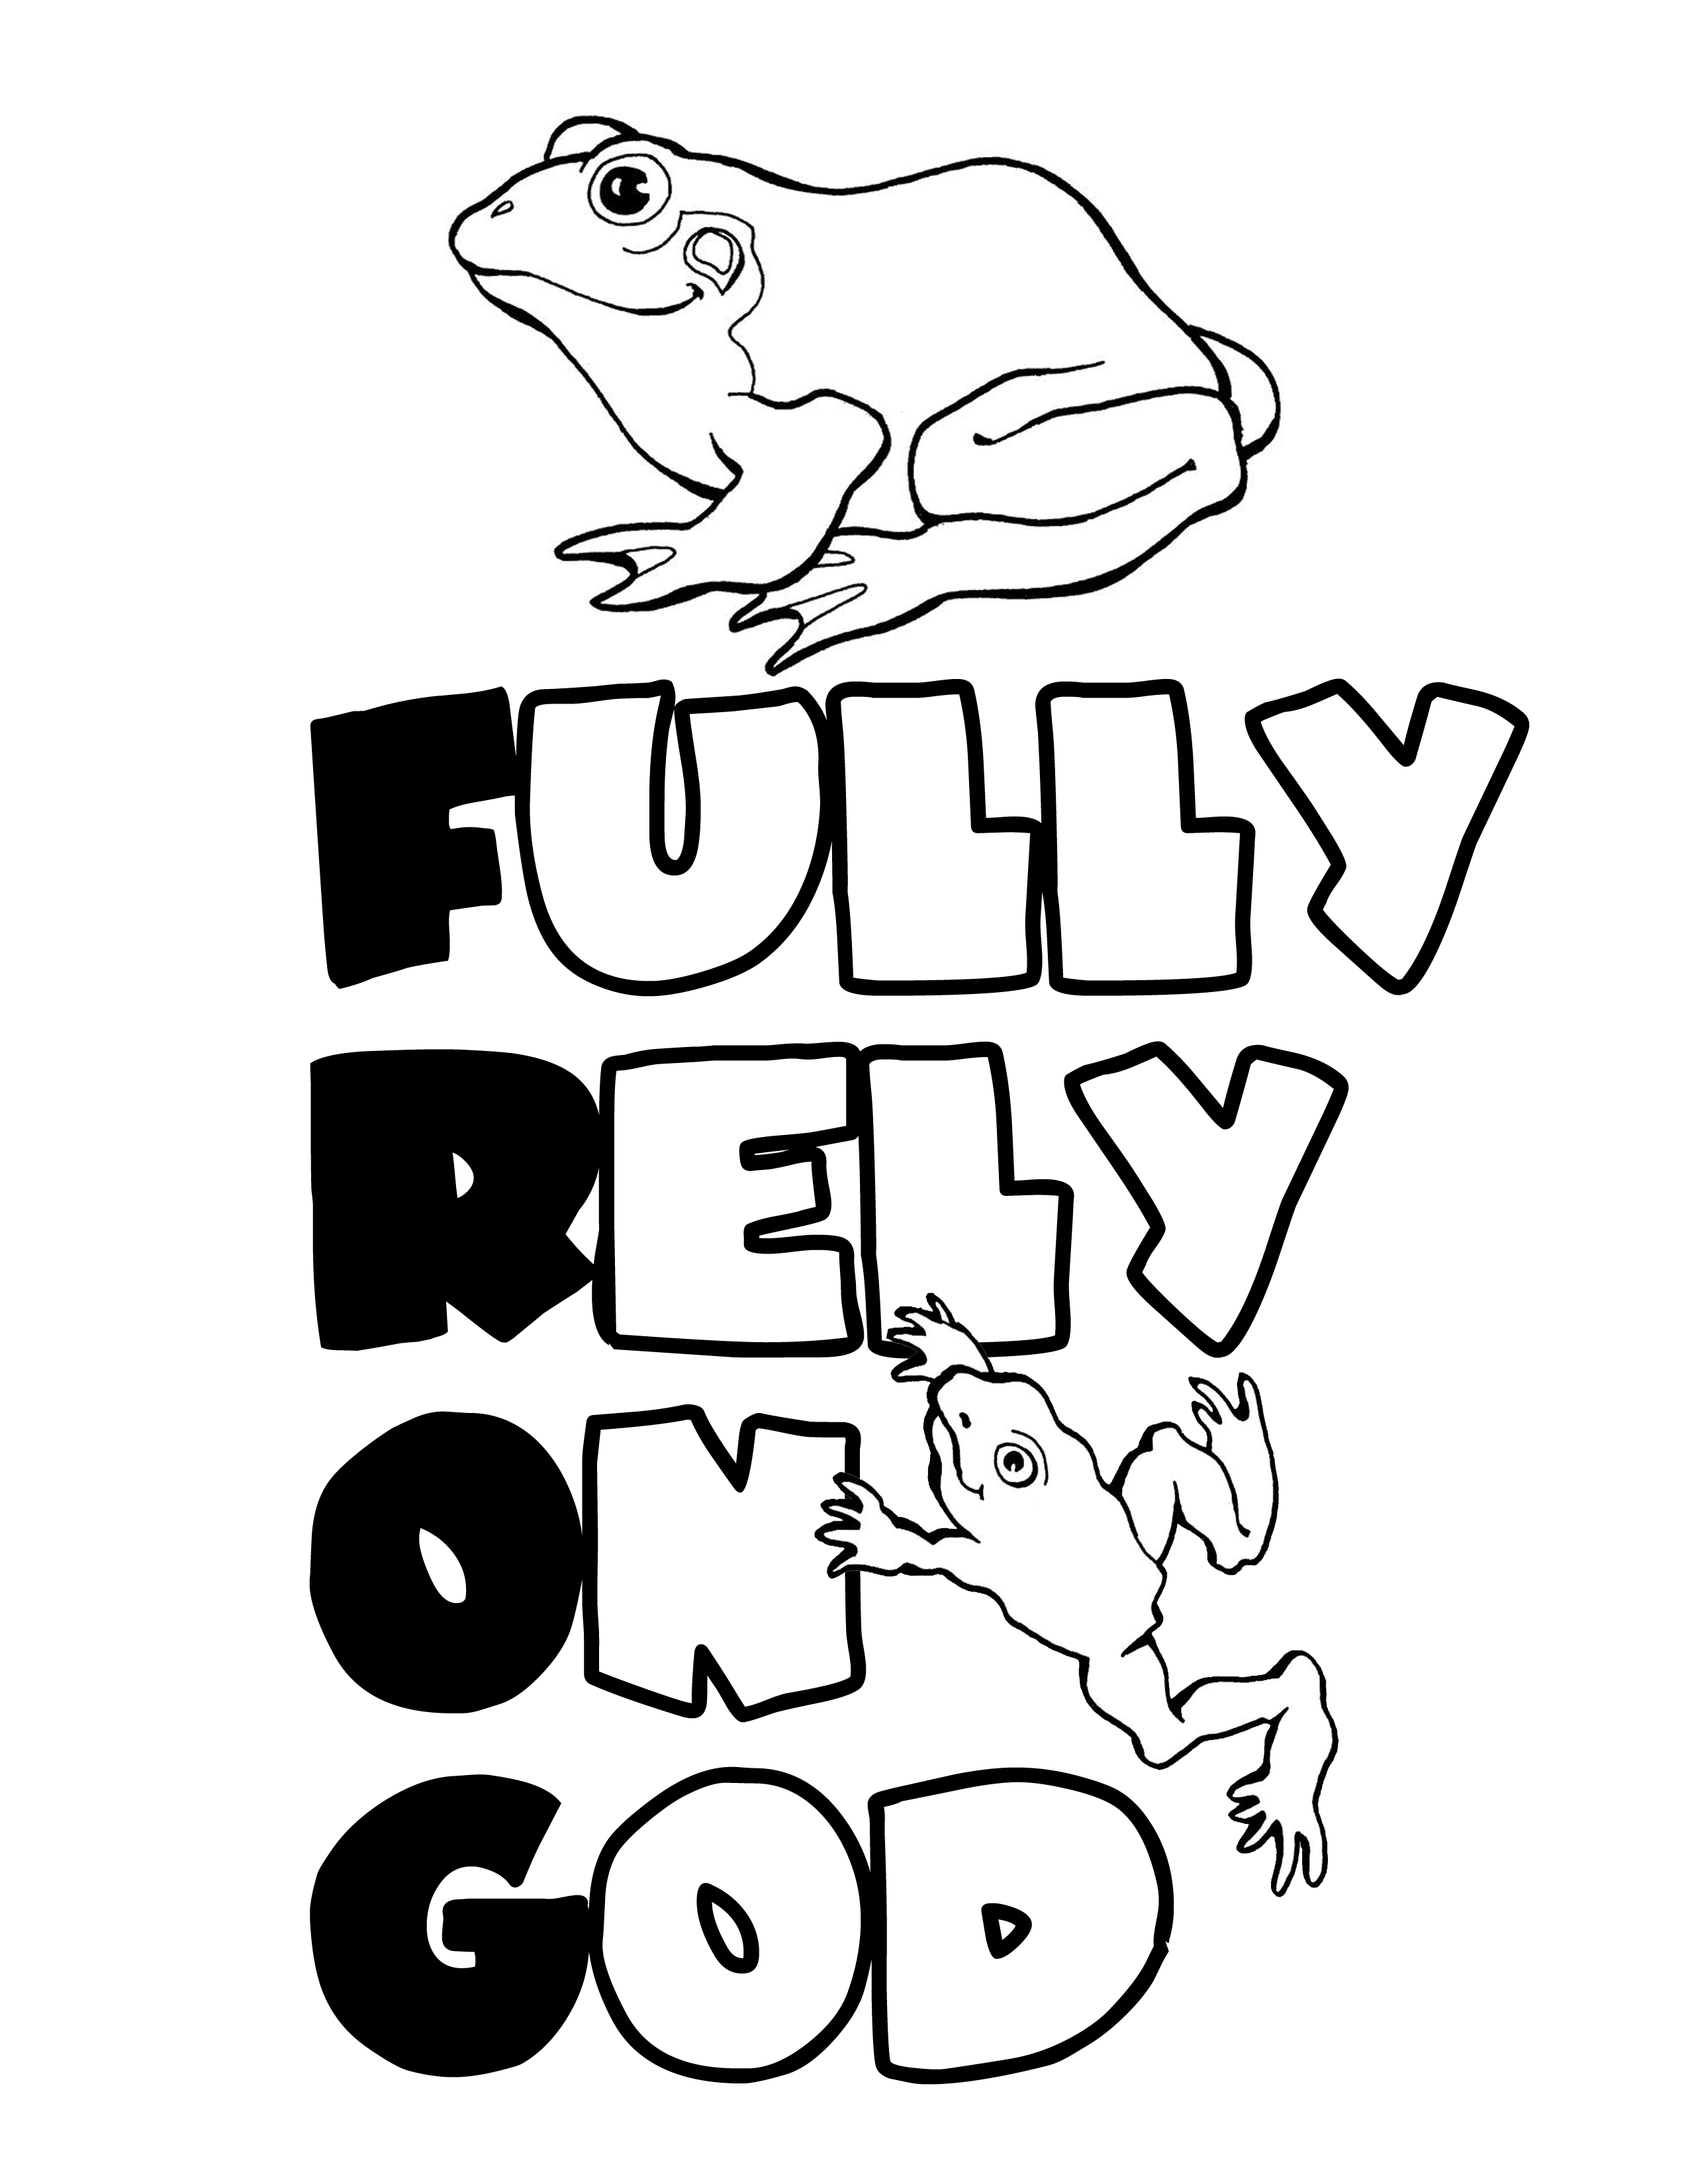 Fully rely on god coloring page